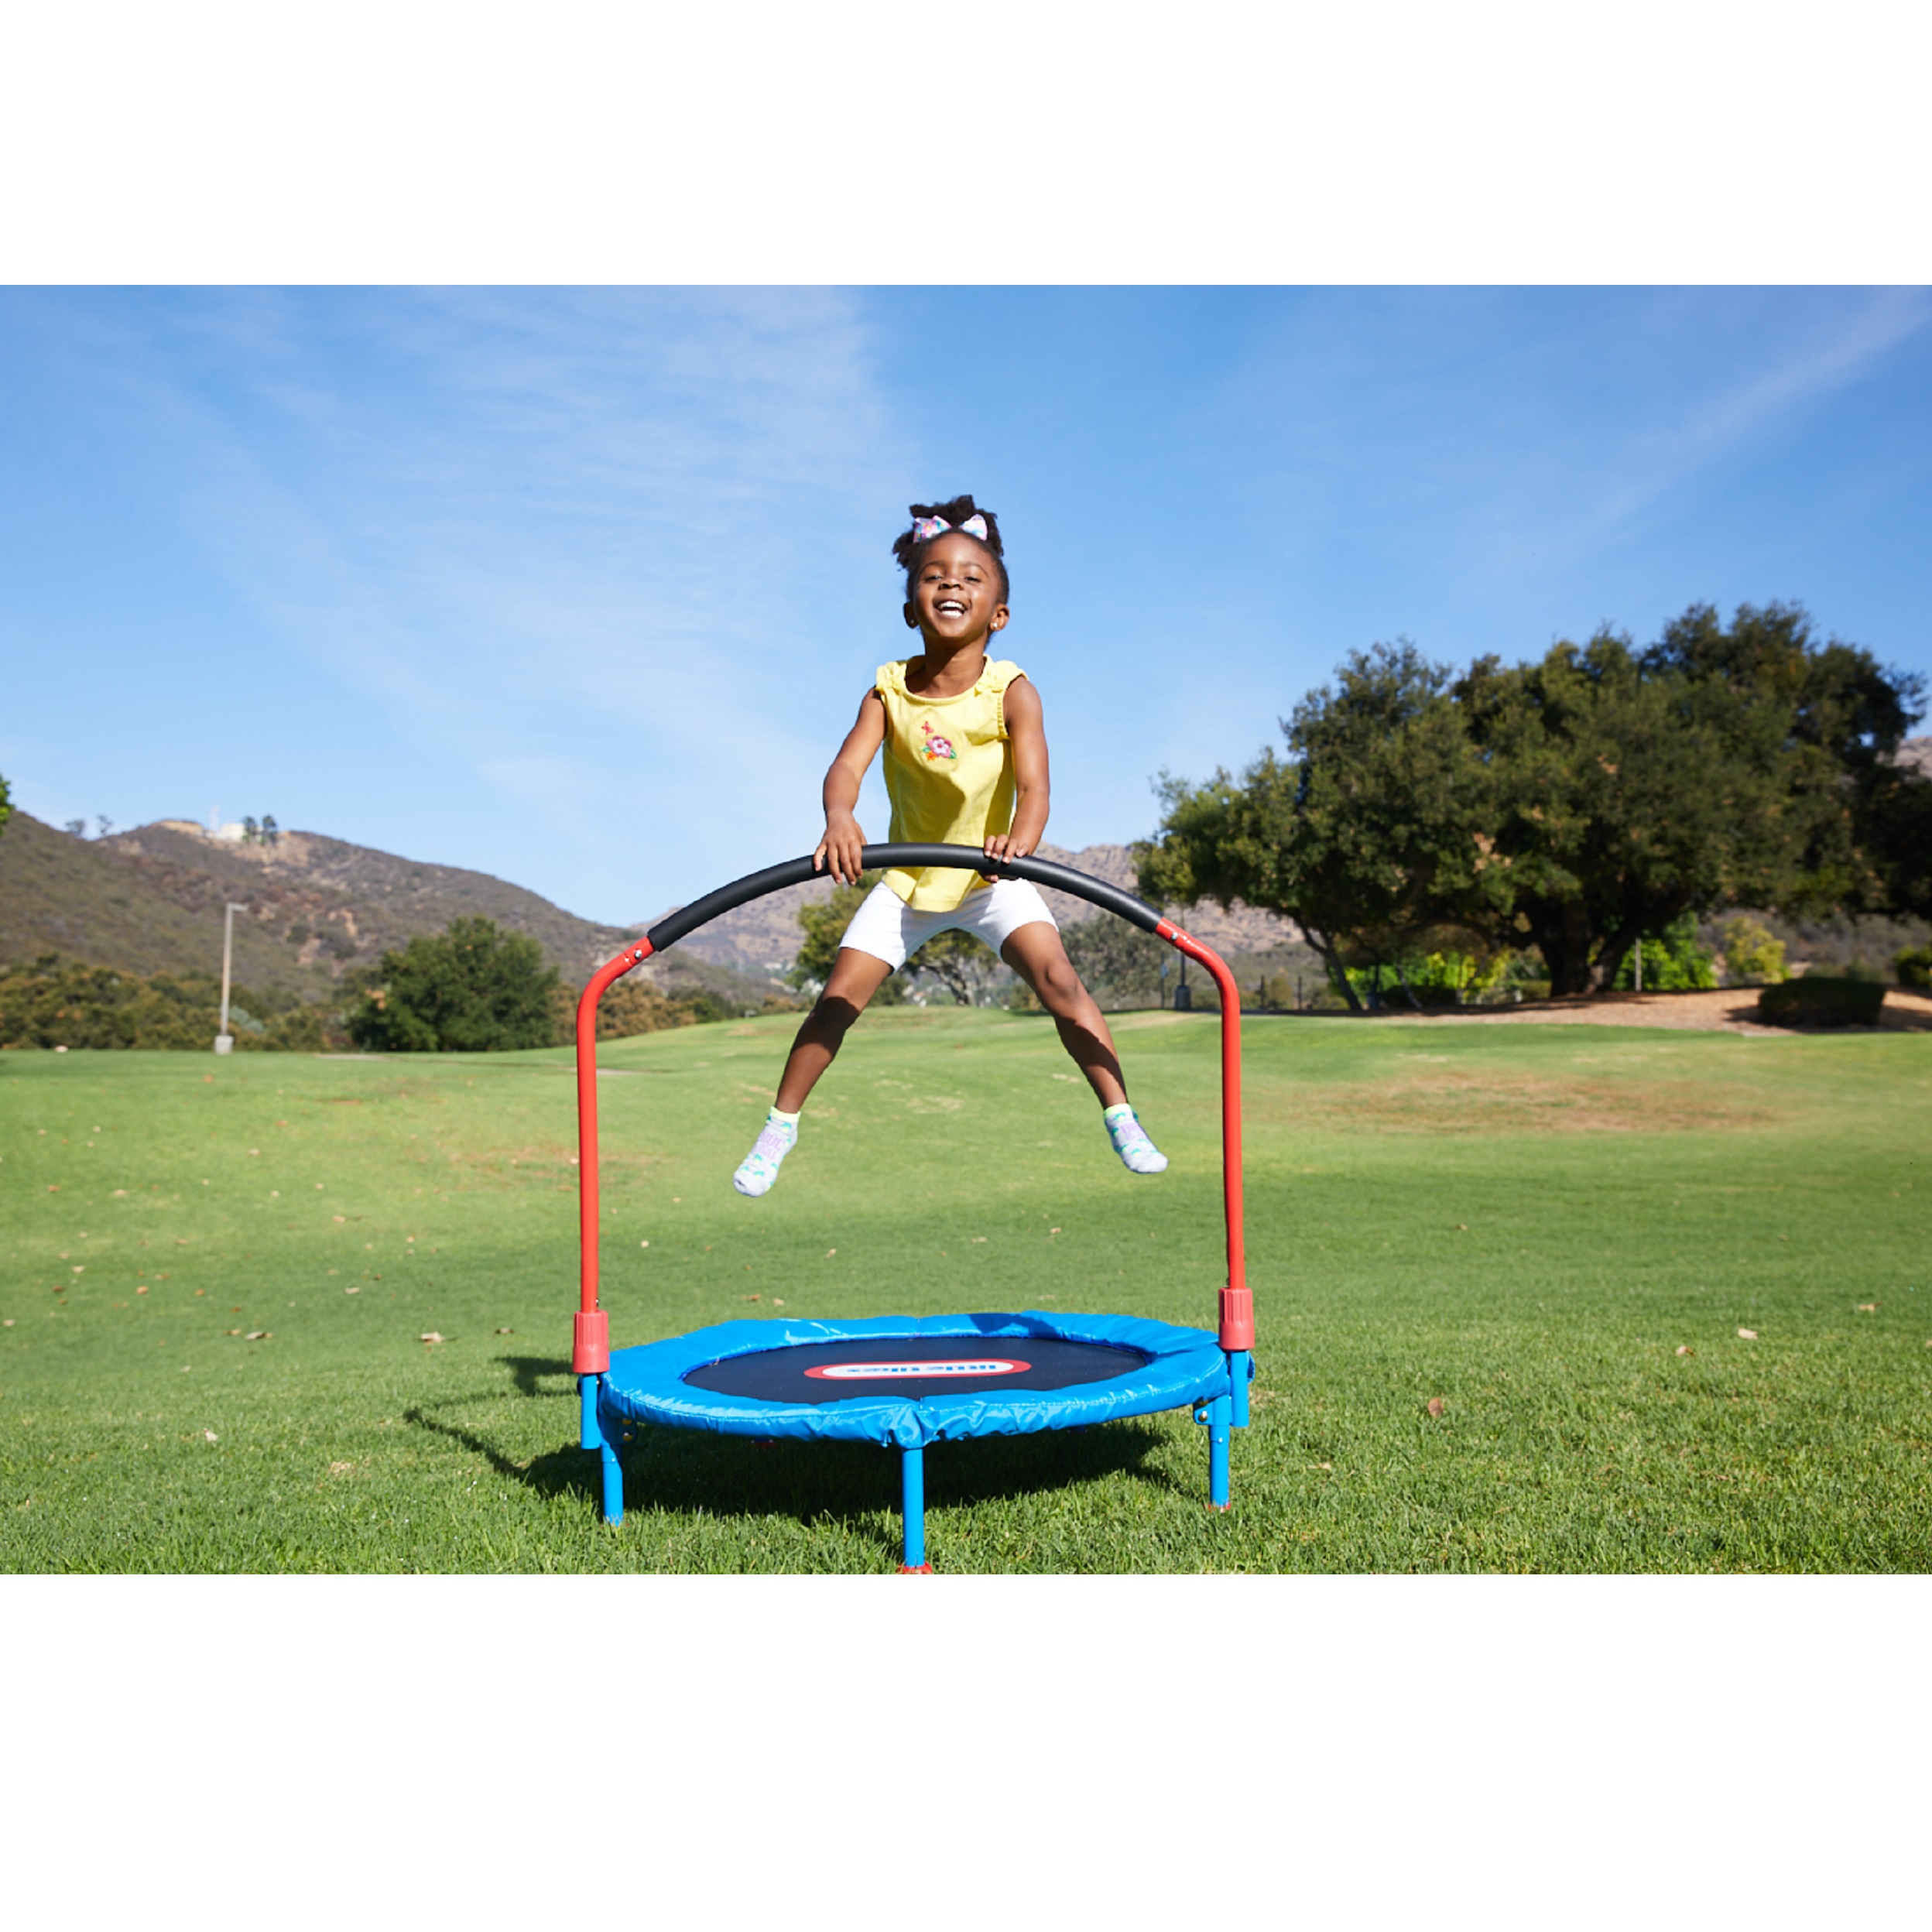 Little Tikes Easy Store 3-Foot Trampoline, with Hand Rail, Blue - image 4 of 8